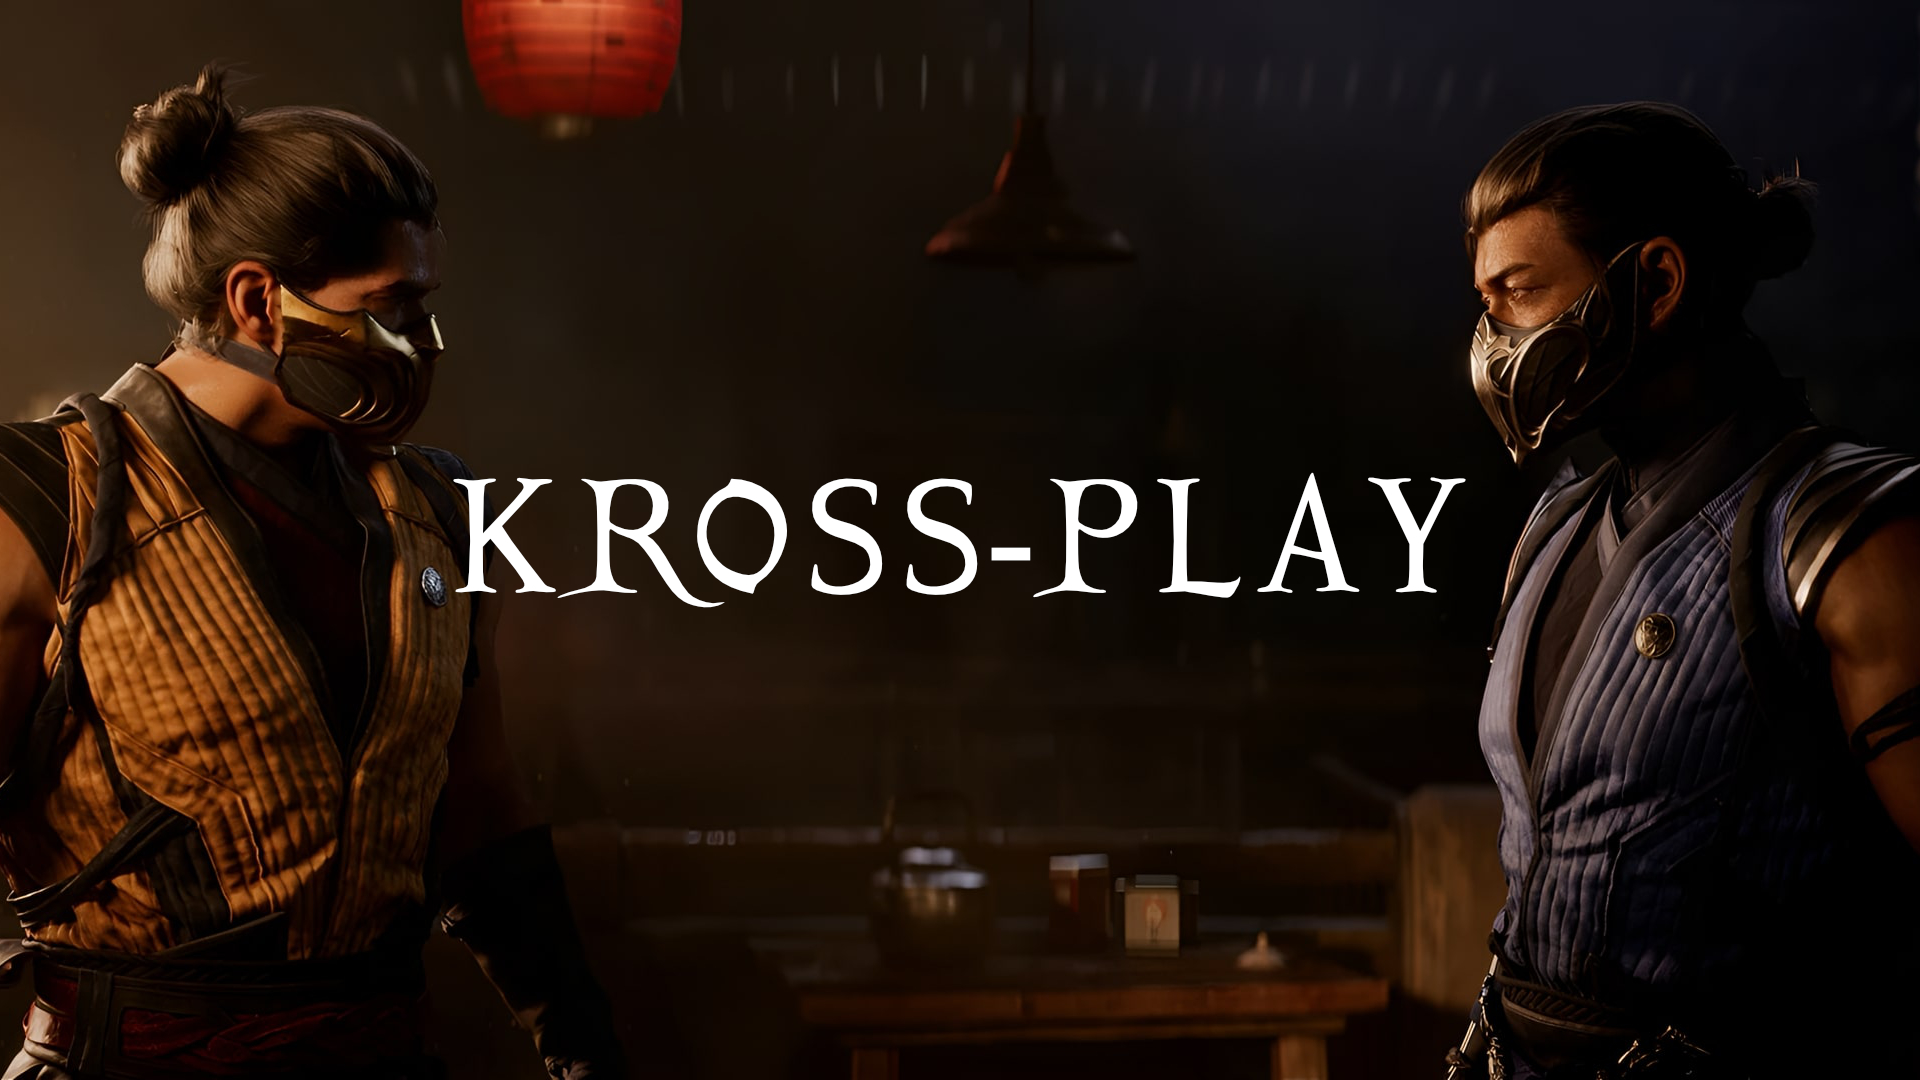 Mortal Kombat 1 will not feature cross-play at launch